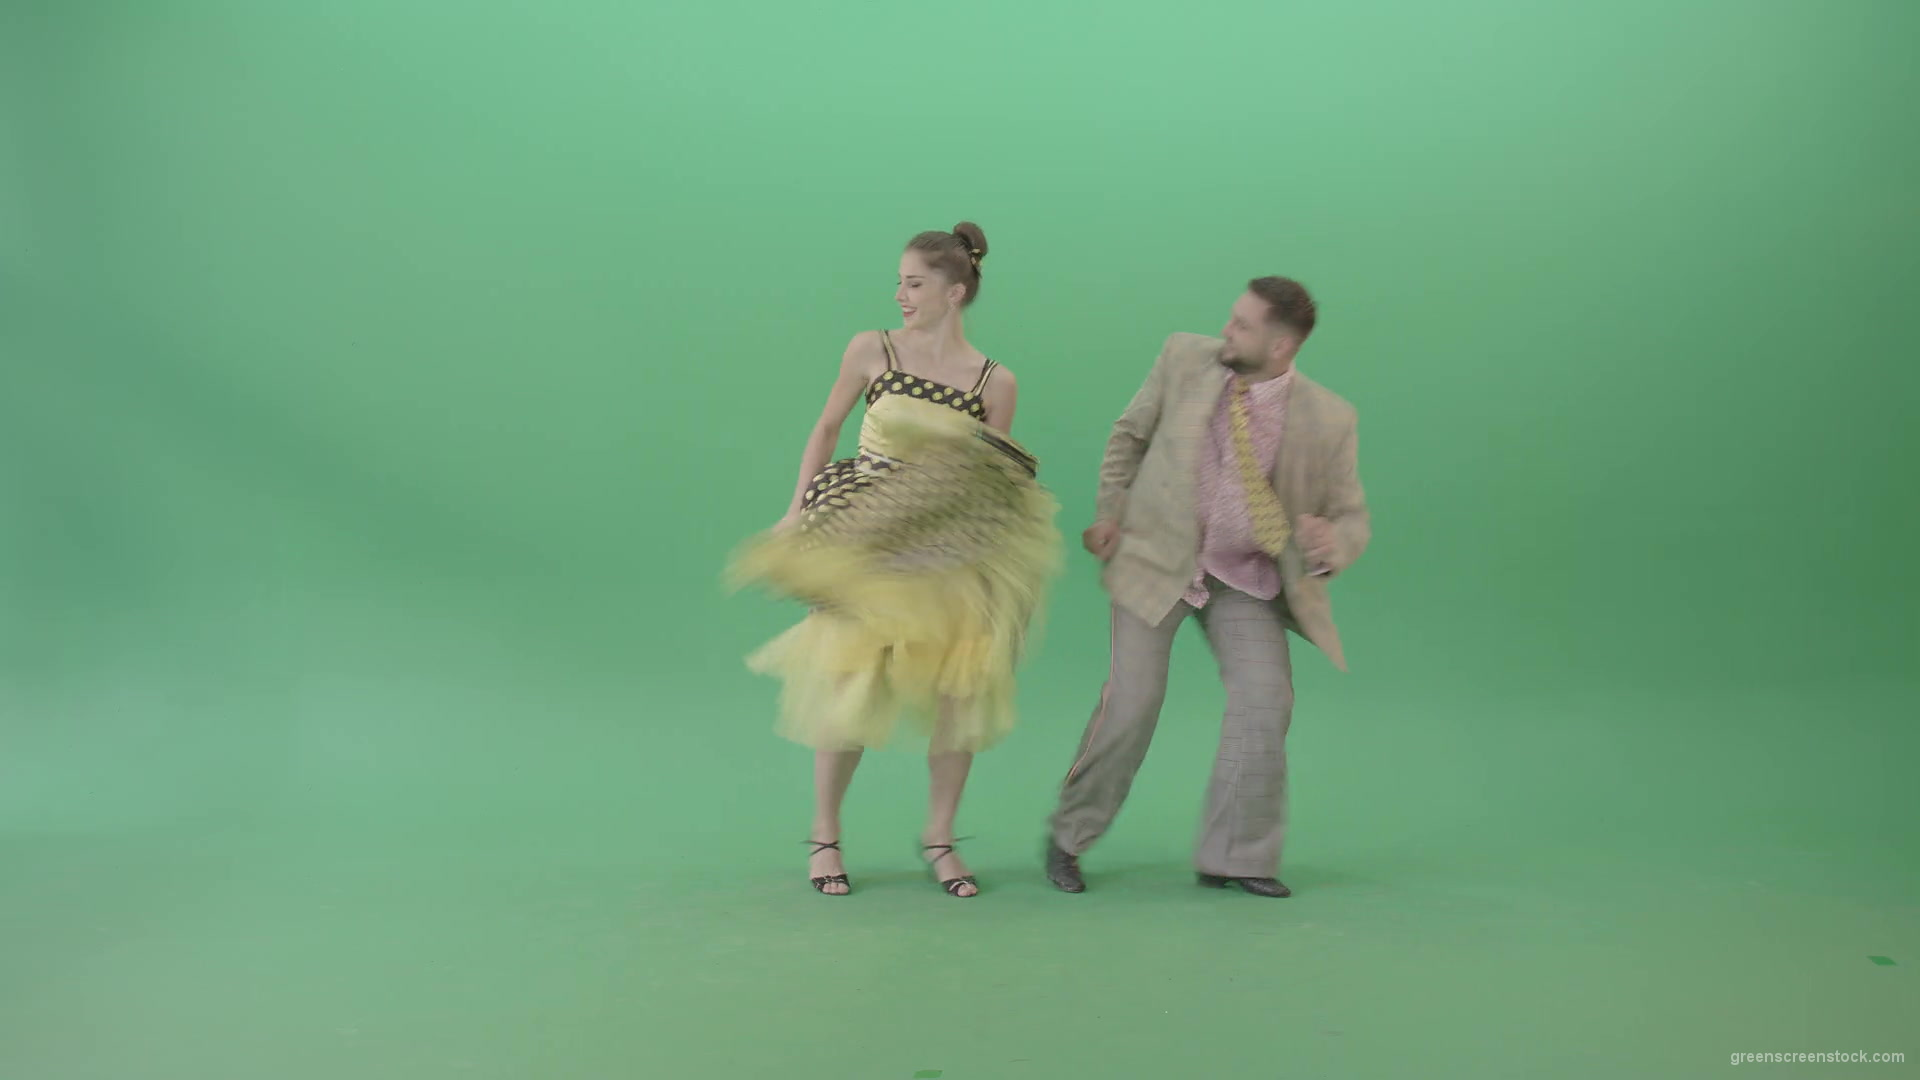 Happy-Man-and-woman-dancing-Boogie-woogie-moves-and-rock-and-roll-over-Green-Screen-4K-Video-Footage-1920_005 Green Screen Stock